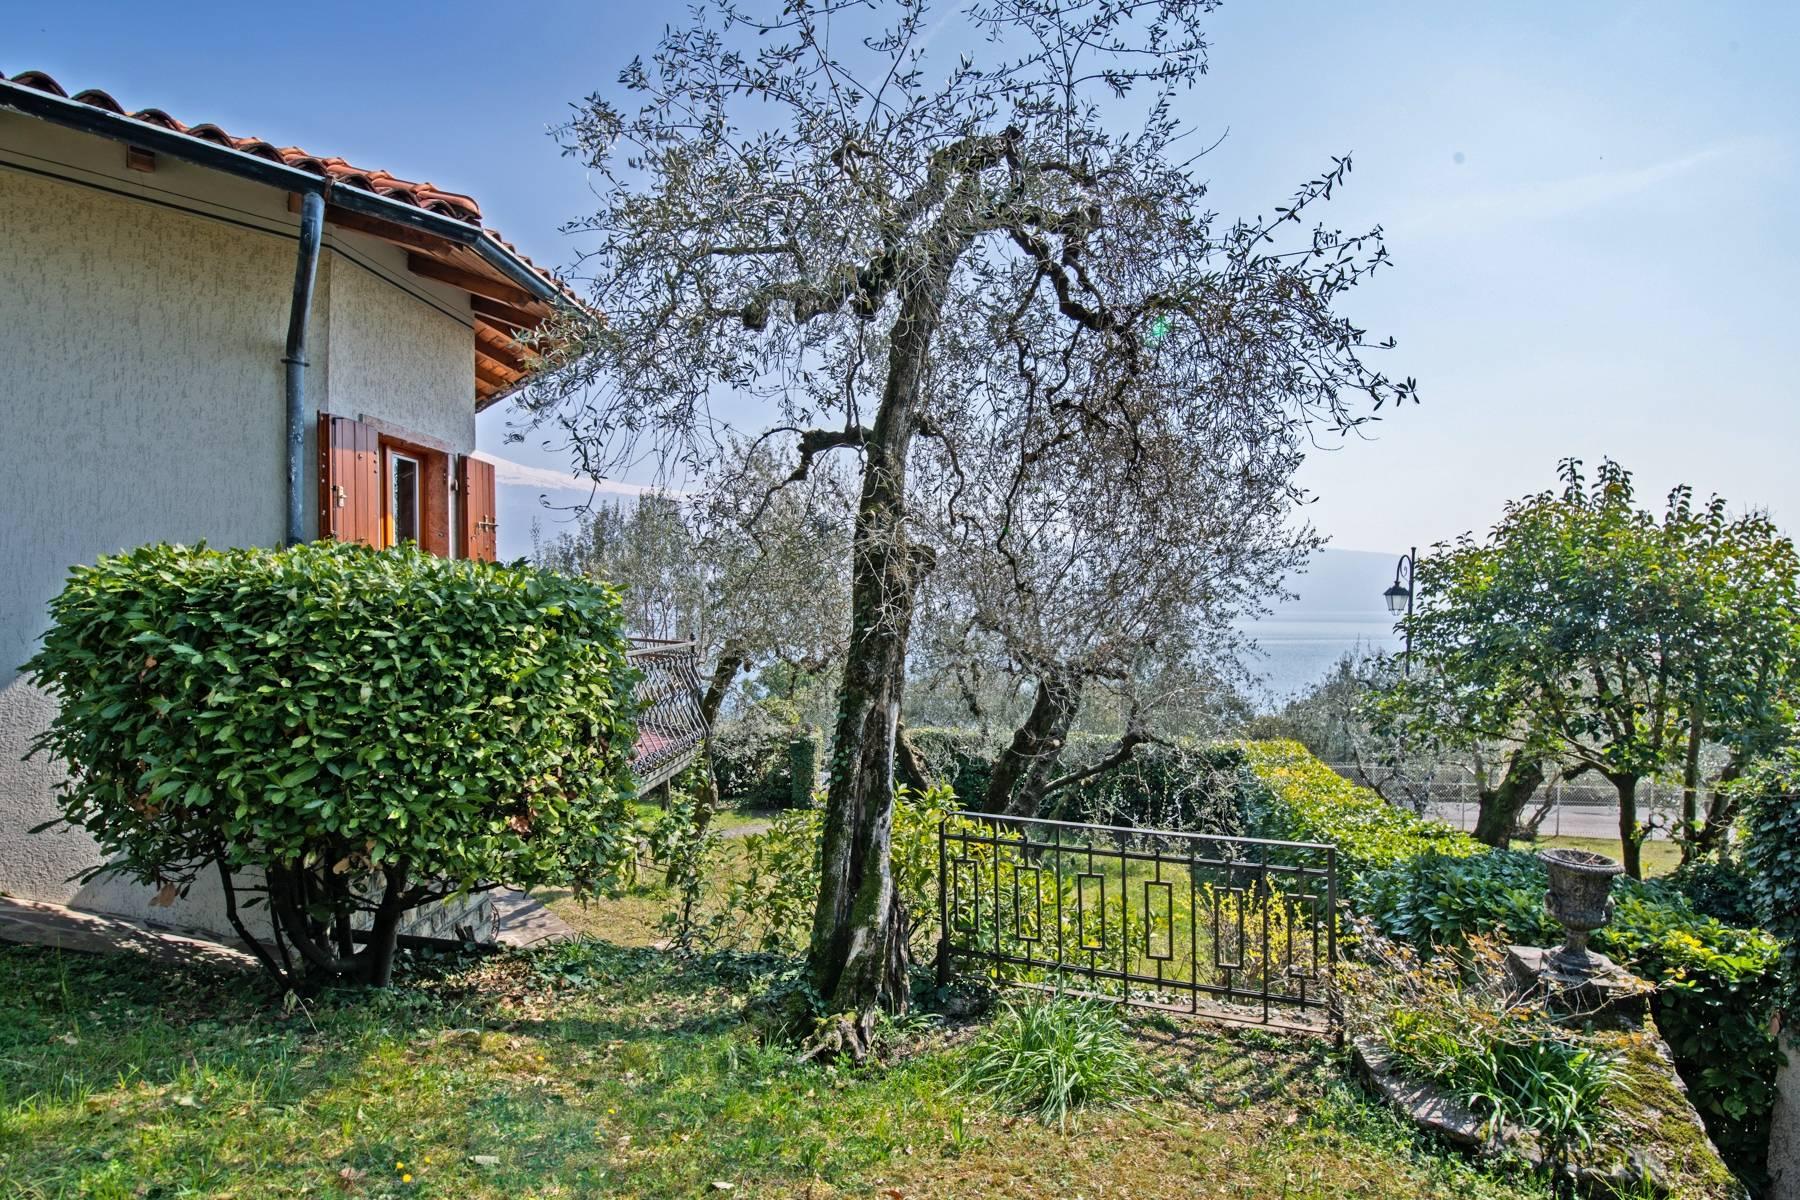 Villa with lake view in Gargnano surrounded by olive trees - 30